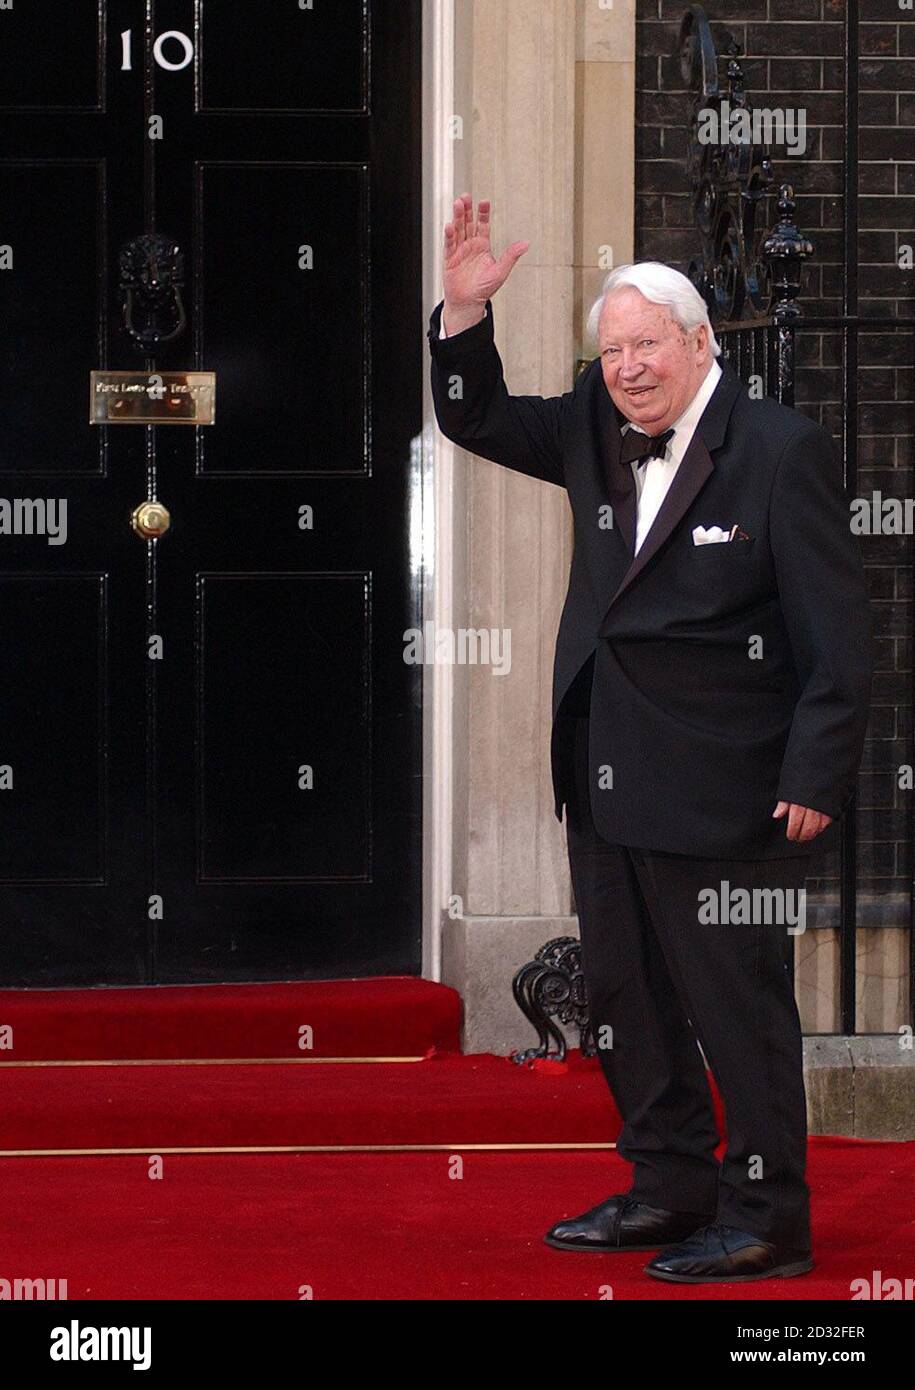 Former Prime Minister Edward Heath arrives at Downing Street, where Prime Minister Tony Blair was hosting a celebratory royal Golden Jubilee dinner. * The Queen, the Duke of Edinburgh and four former Prime Ministers were attending along with the relatives of five other prime ministers who held power during the Queen's 50-year reign but have since died. Stock Photo